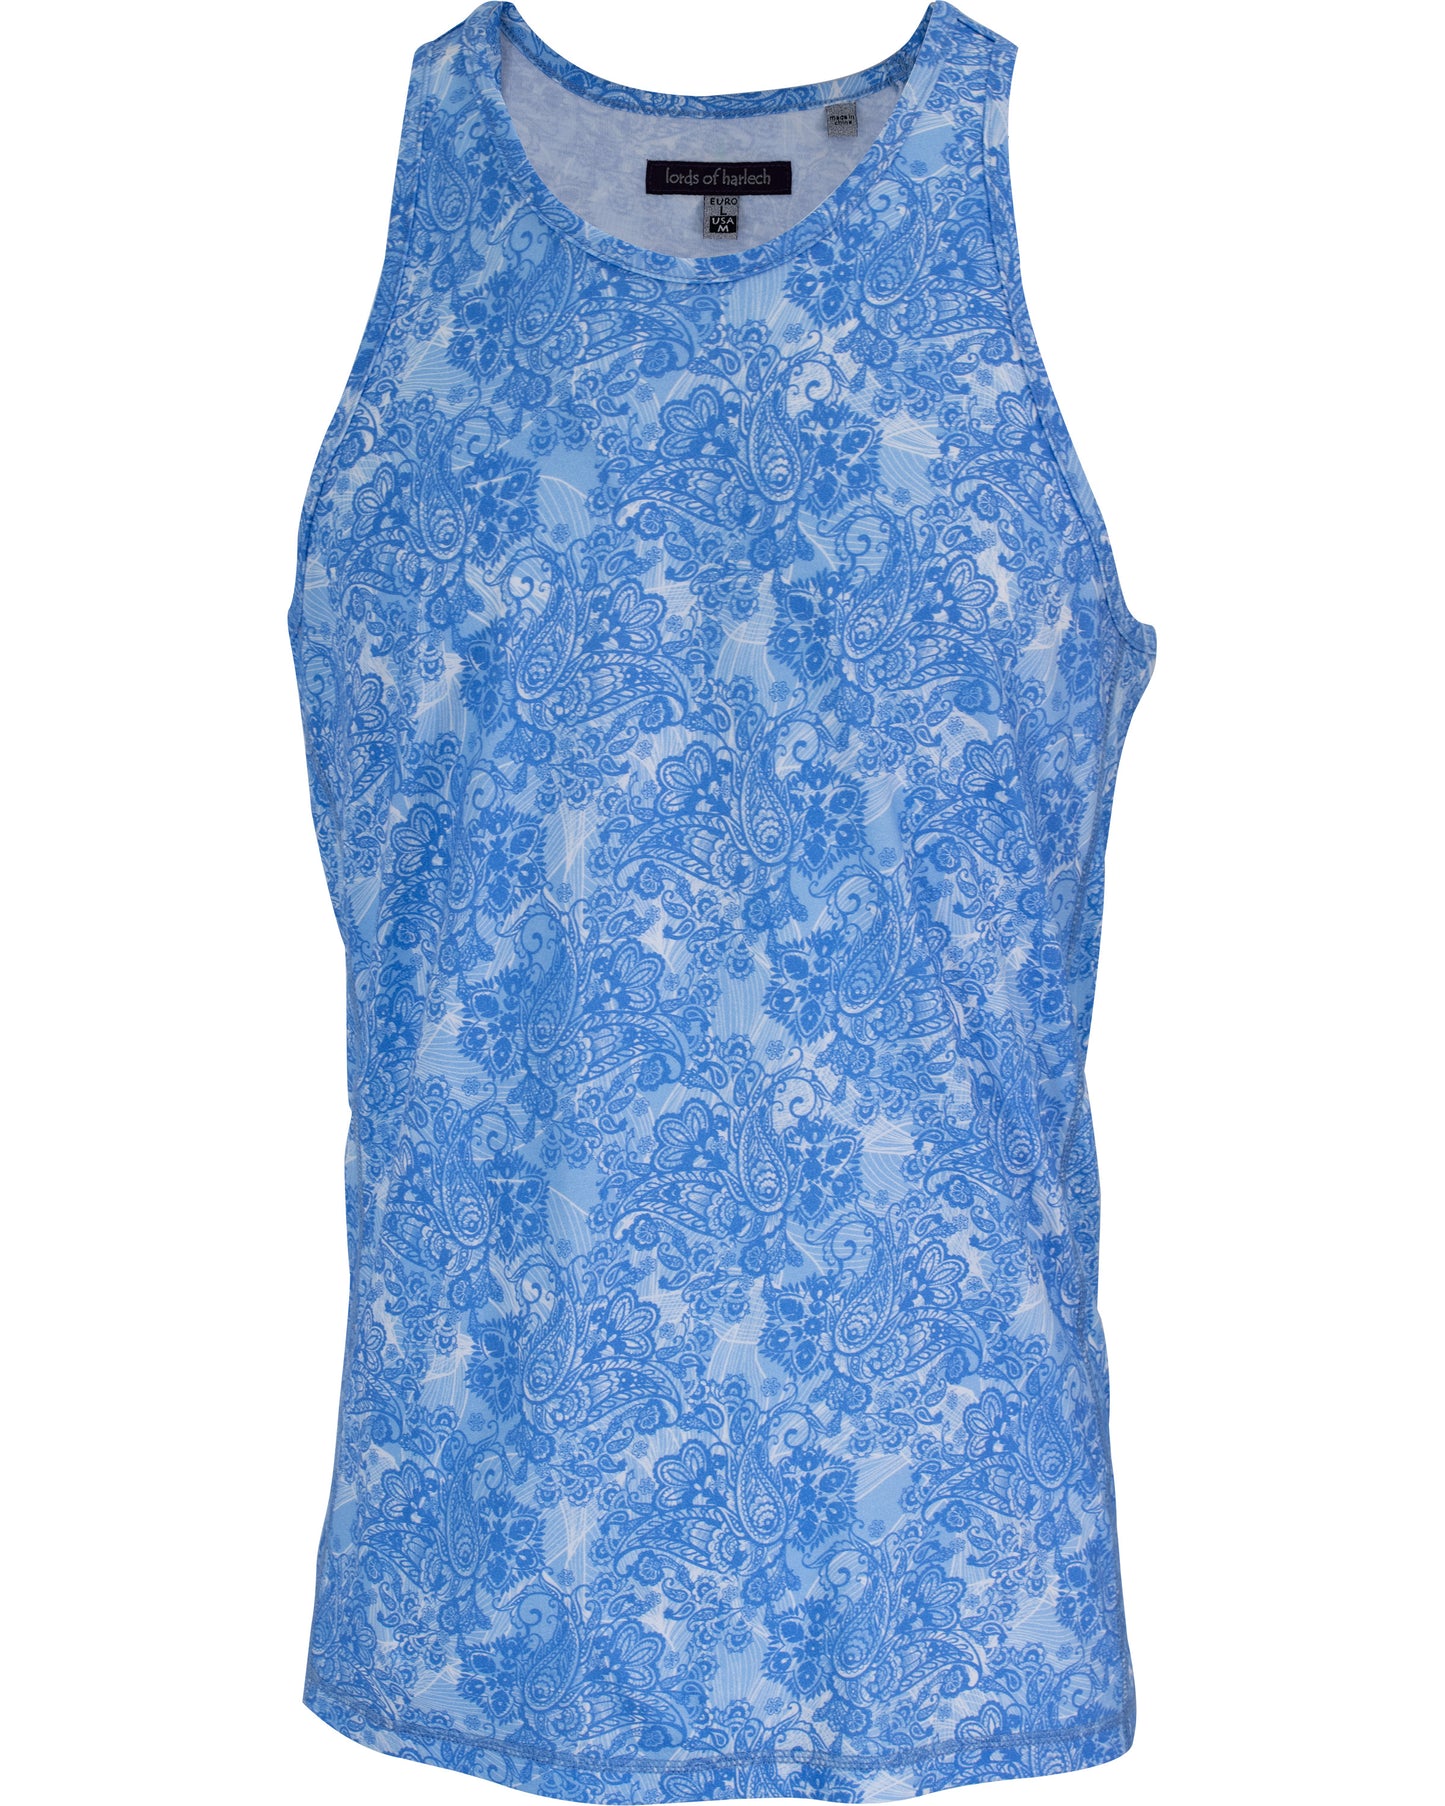 TEDFORD PAISLEY WAVE TANK IN BLUE